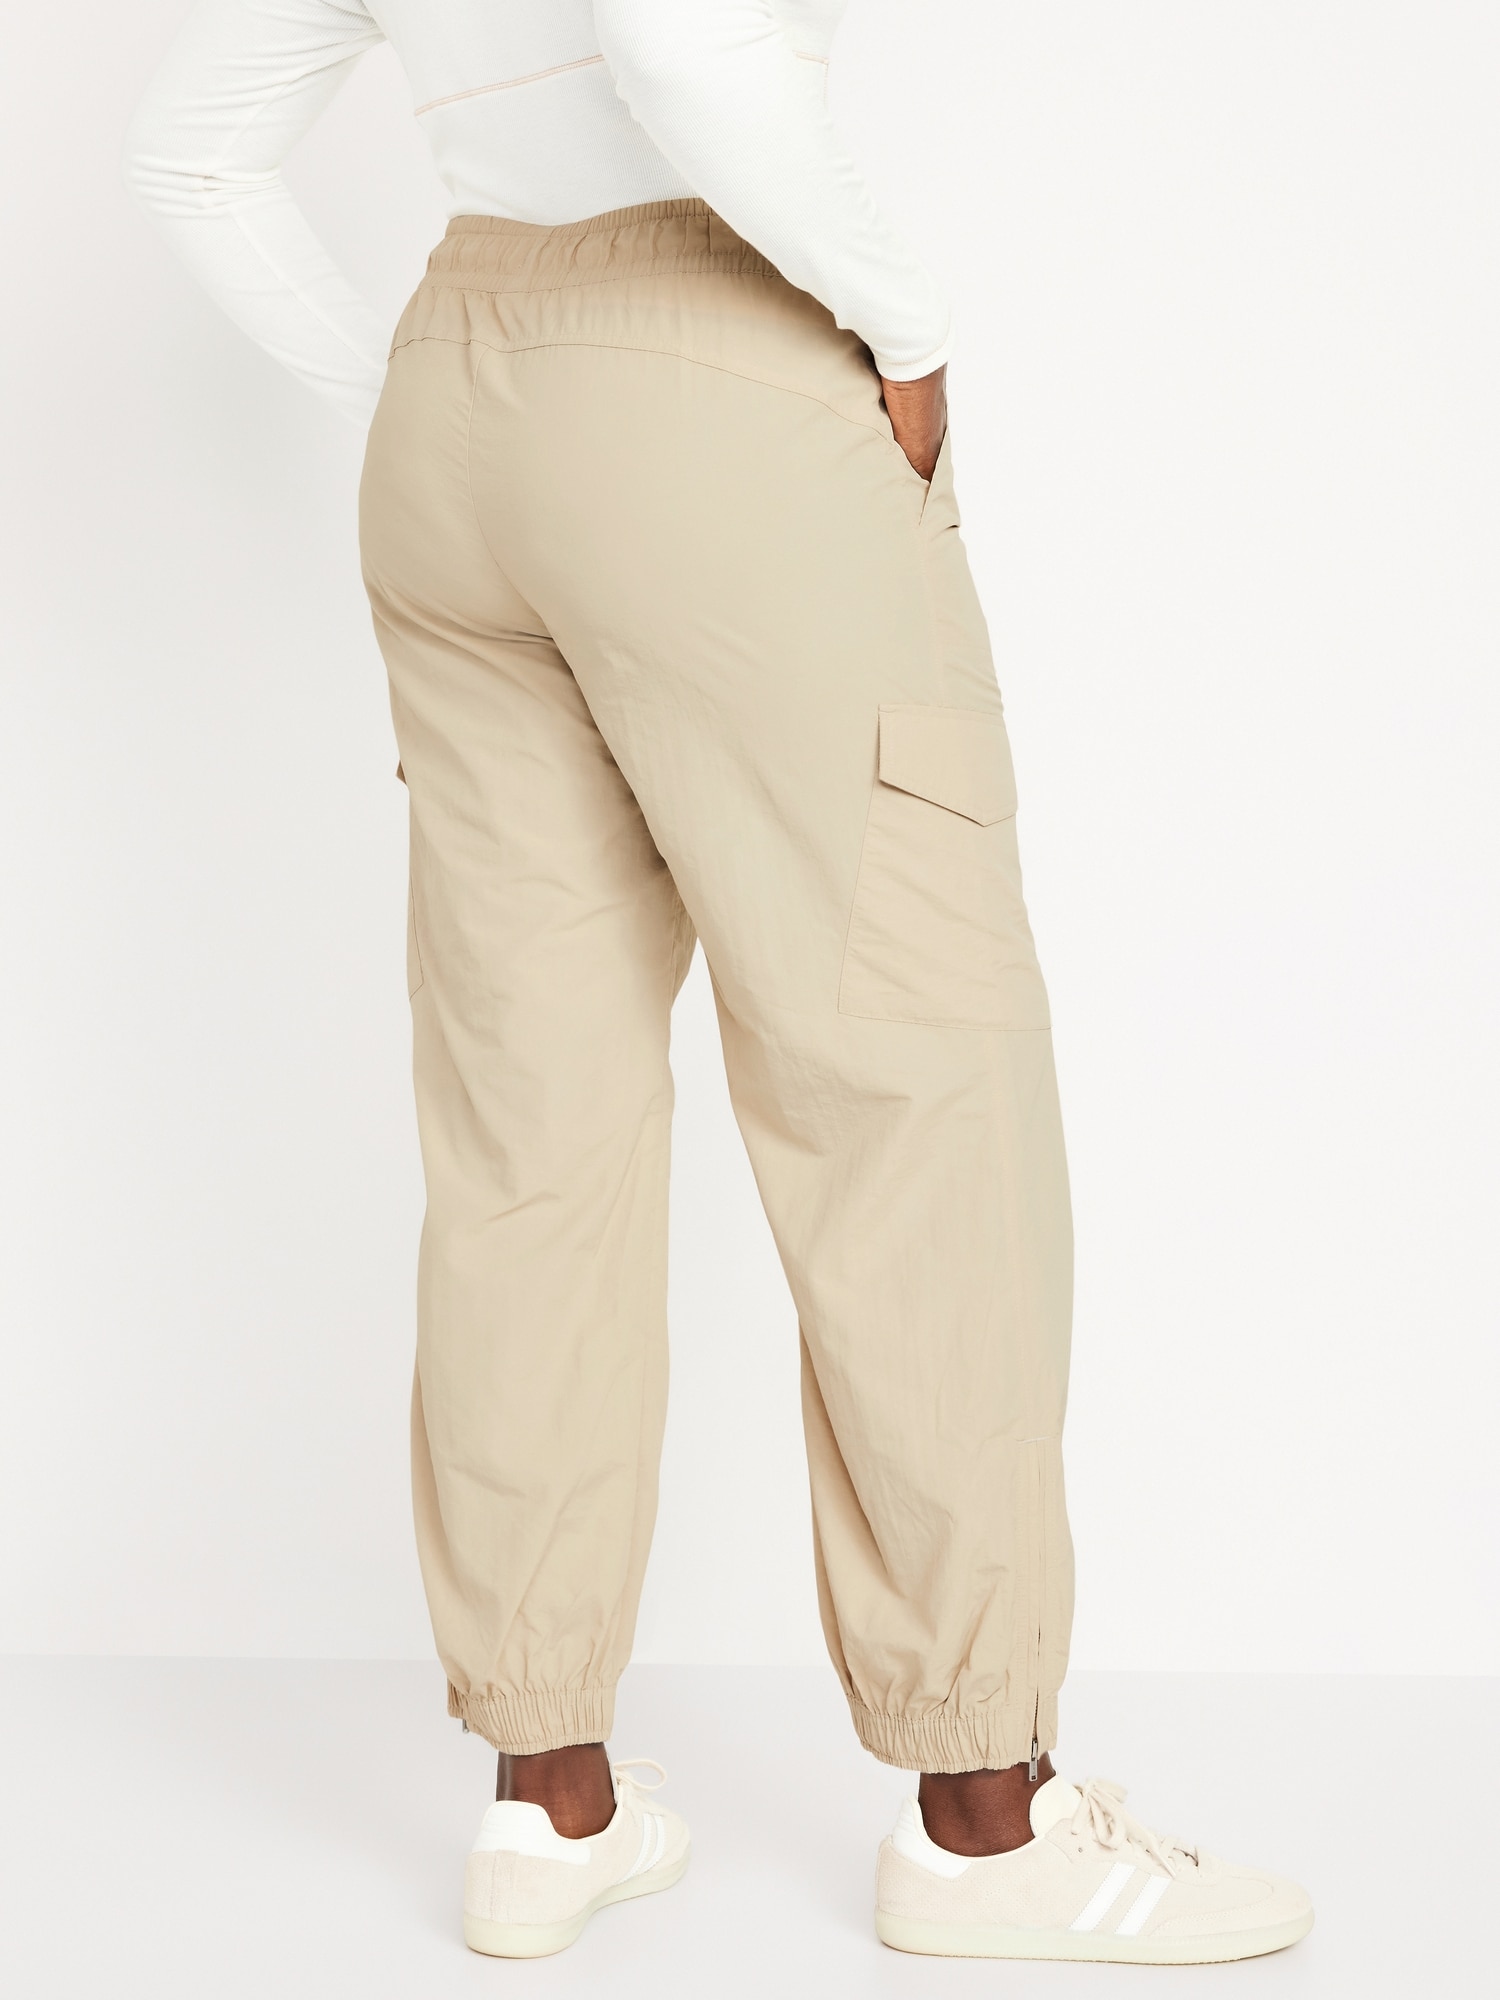 Womens High Waisted Woven Cargo Jogger - Beige - L, Khaki Pants Outfit  Women Casual